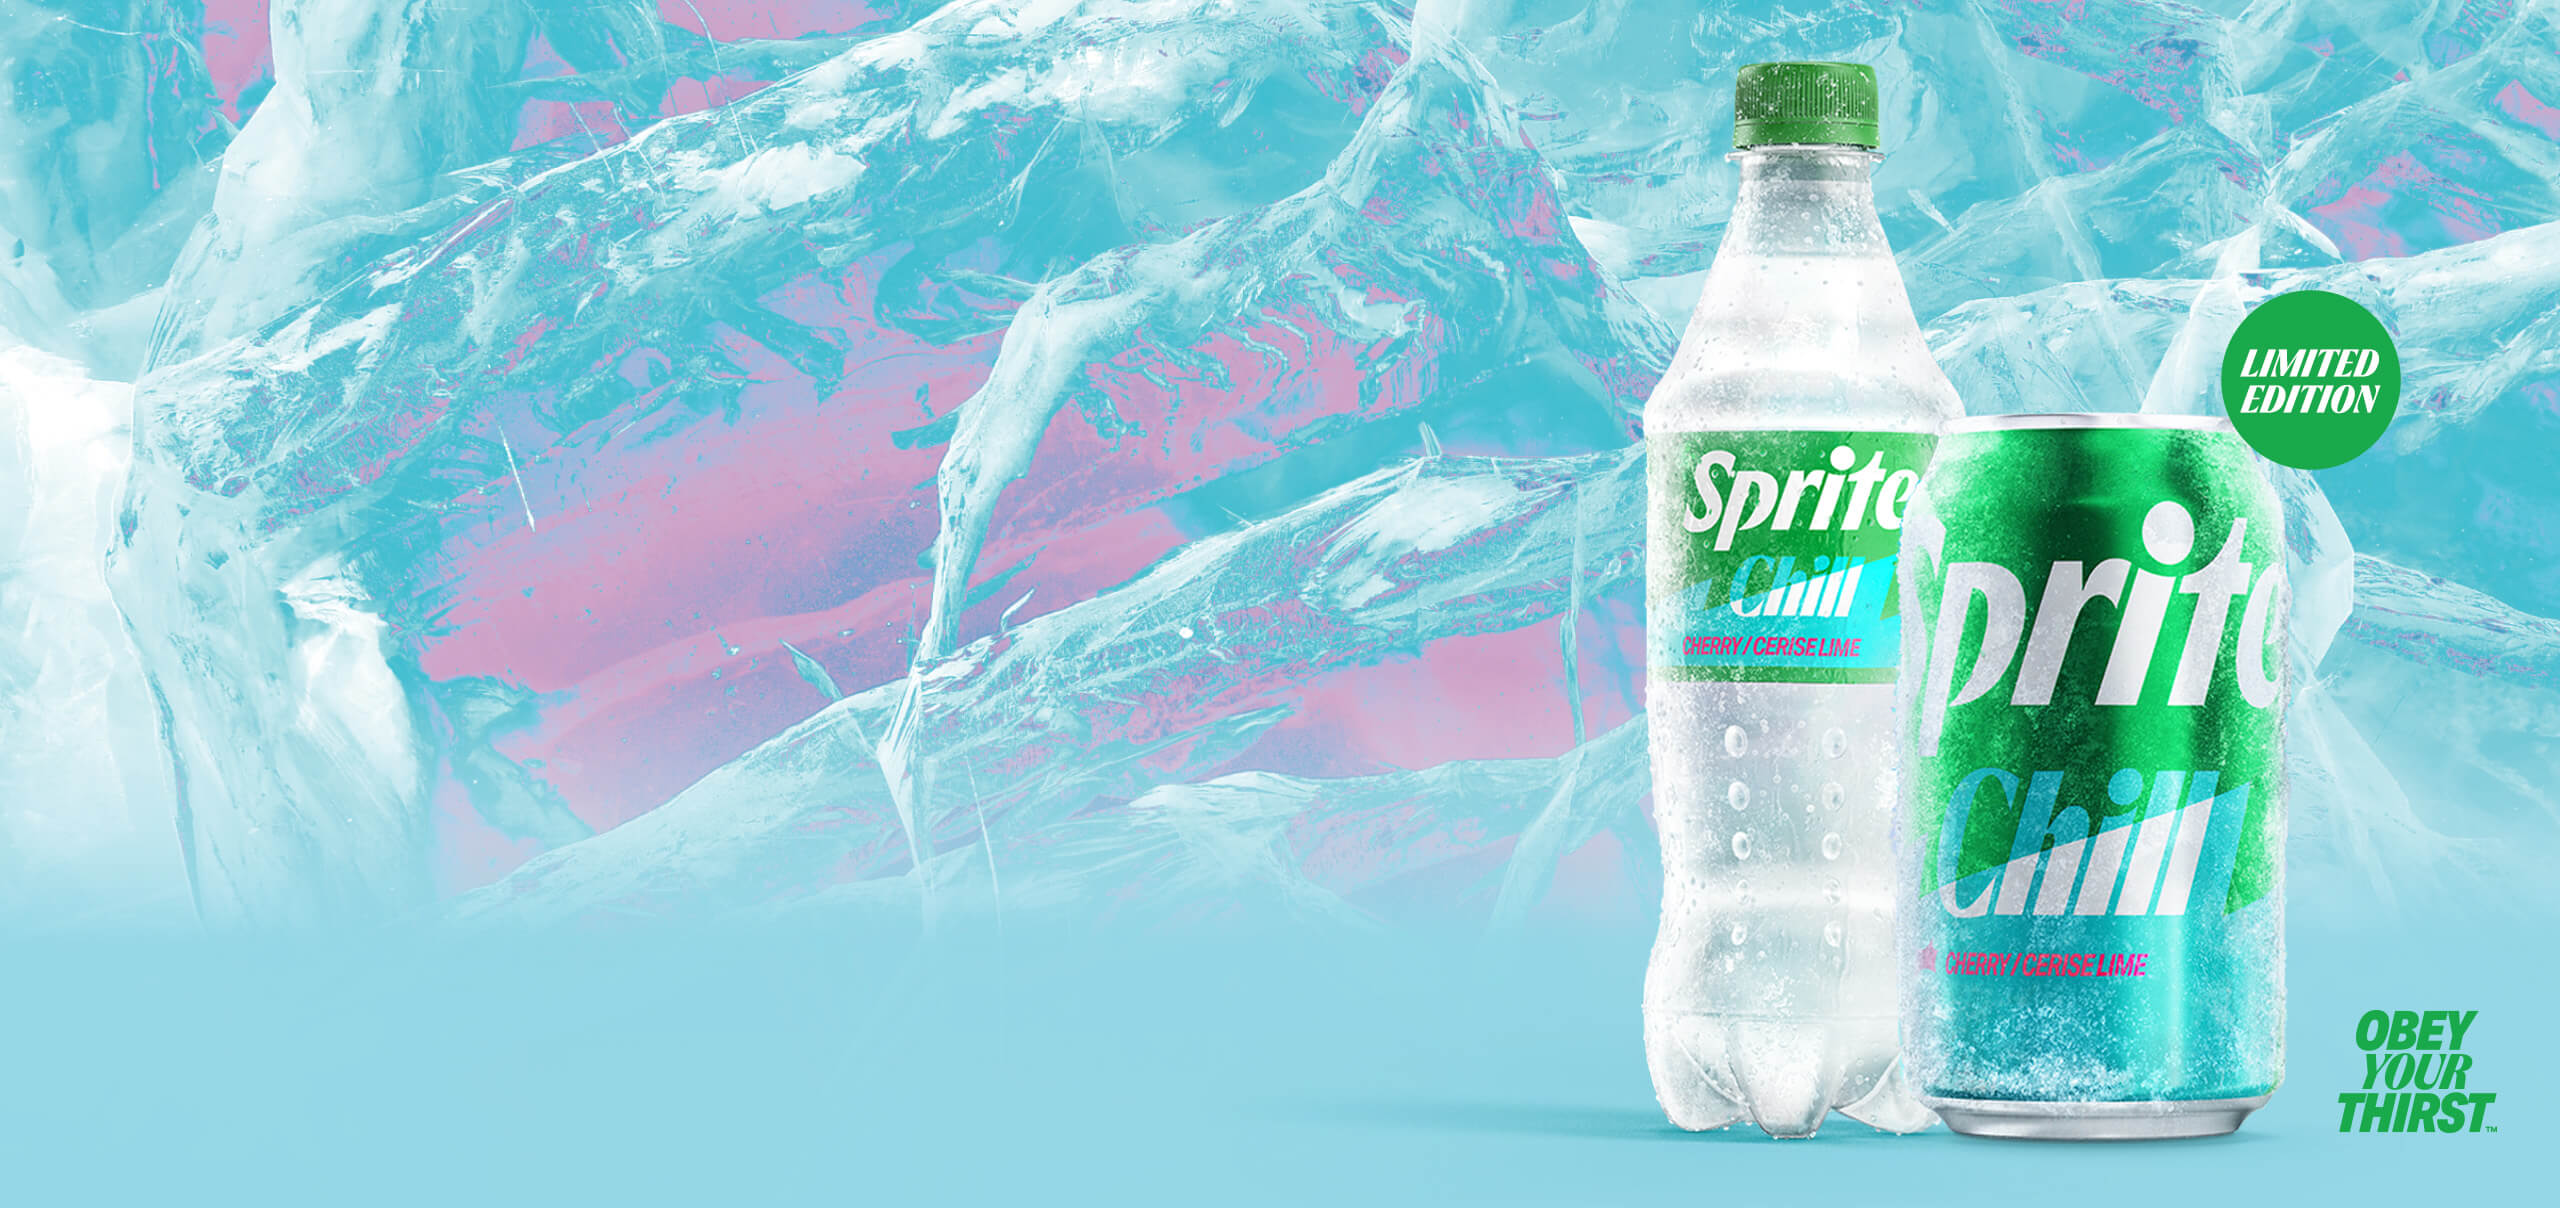 Limited Edition Sprite Chill Cherry Lime. Obey Your Thirst.